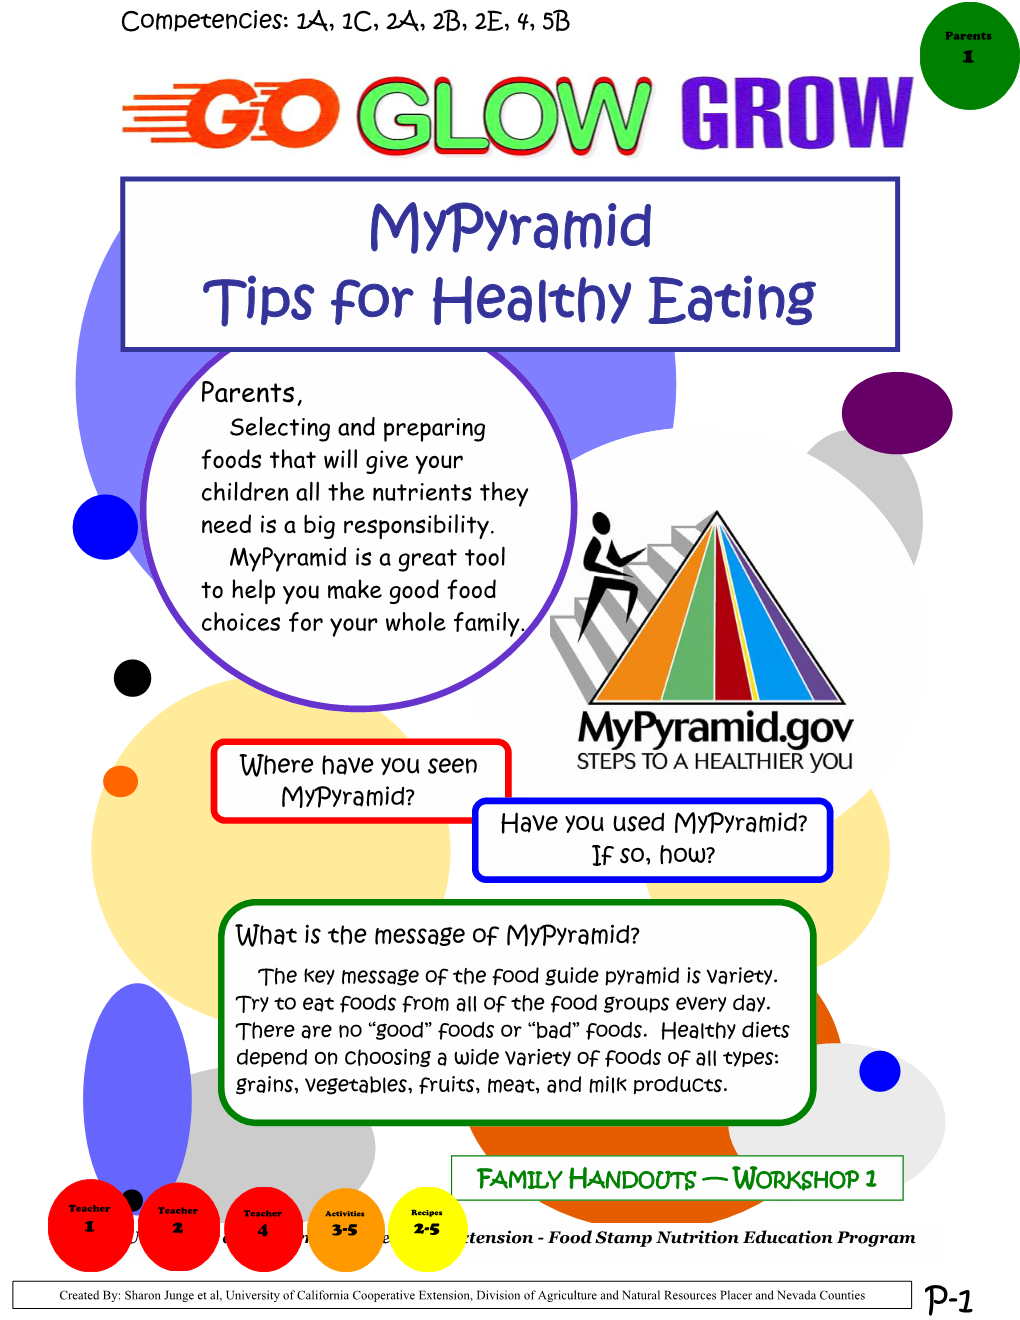 Mypyramid Tips for Healthy Eating